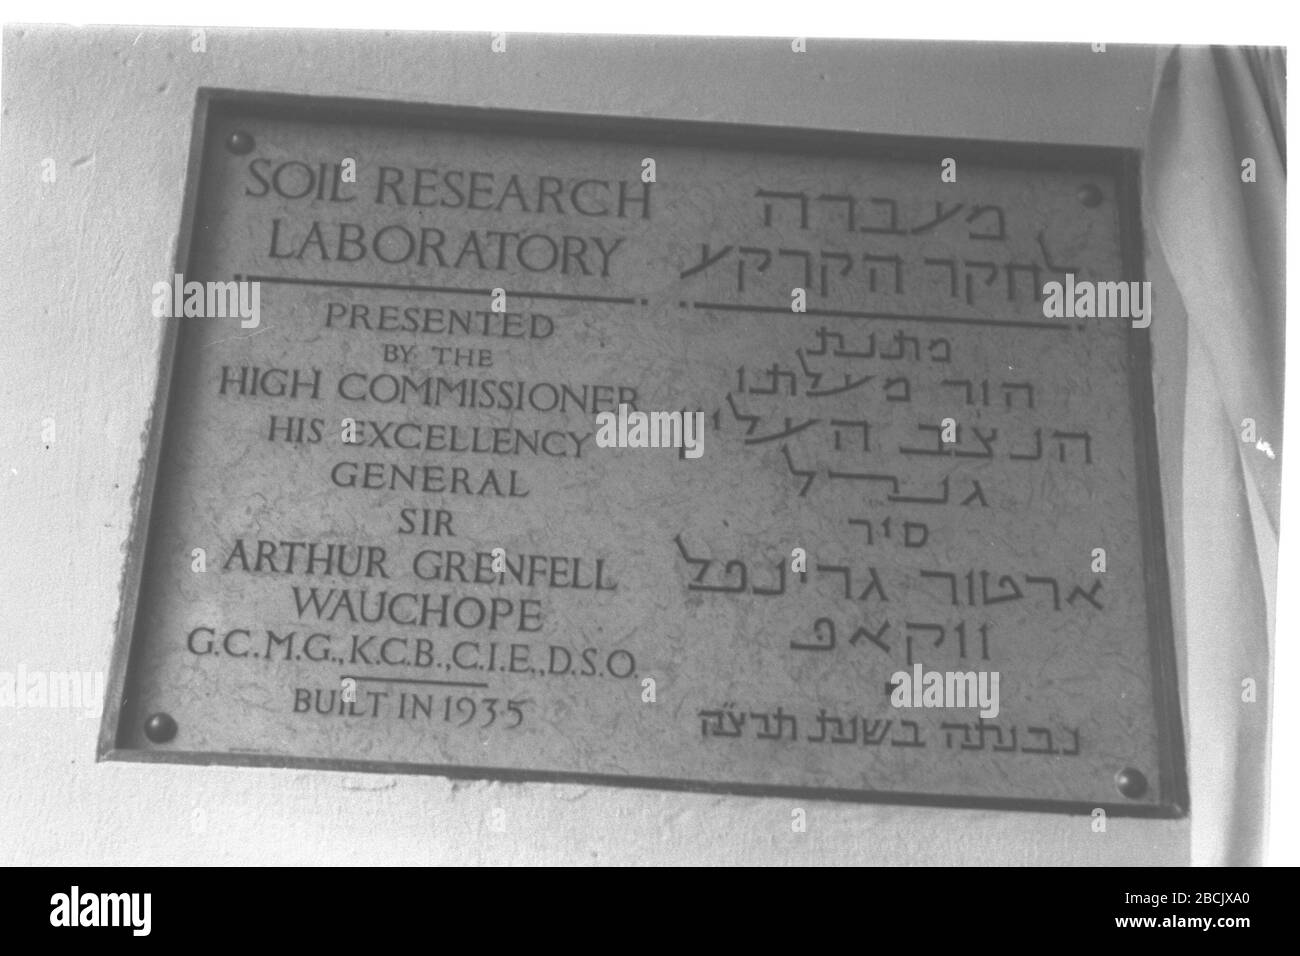 English Marble Plaque Unveiled During Thr Dedication Ceremony Of The Soil Research Laboratory In Rehovot C U O U C O C E C O C E O I O I U E I I U O Ss I Ss Ss E U O I U I I U Ss